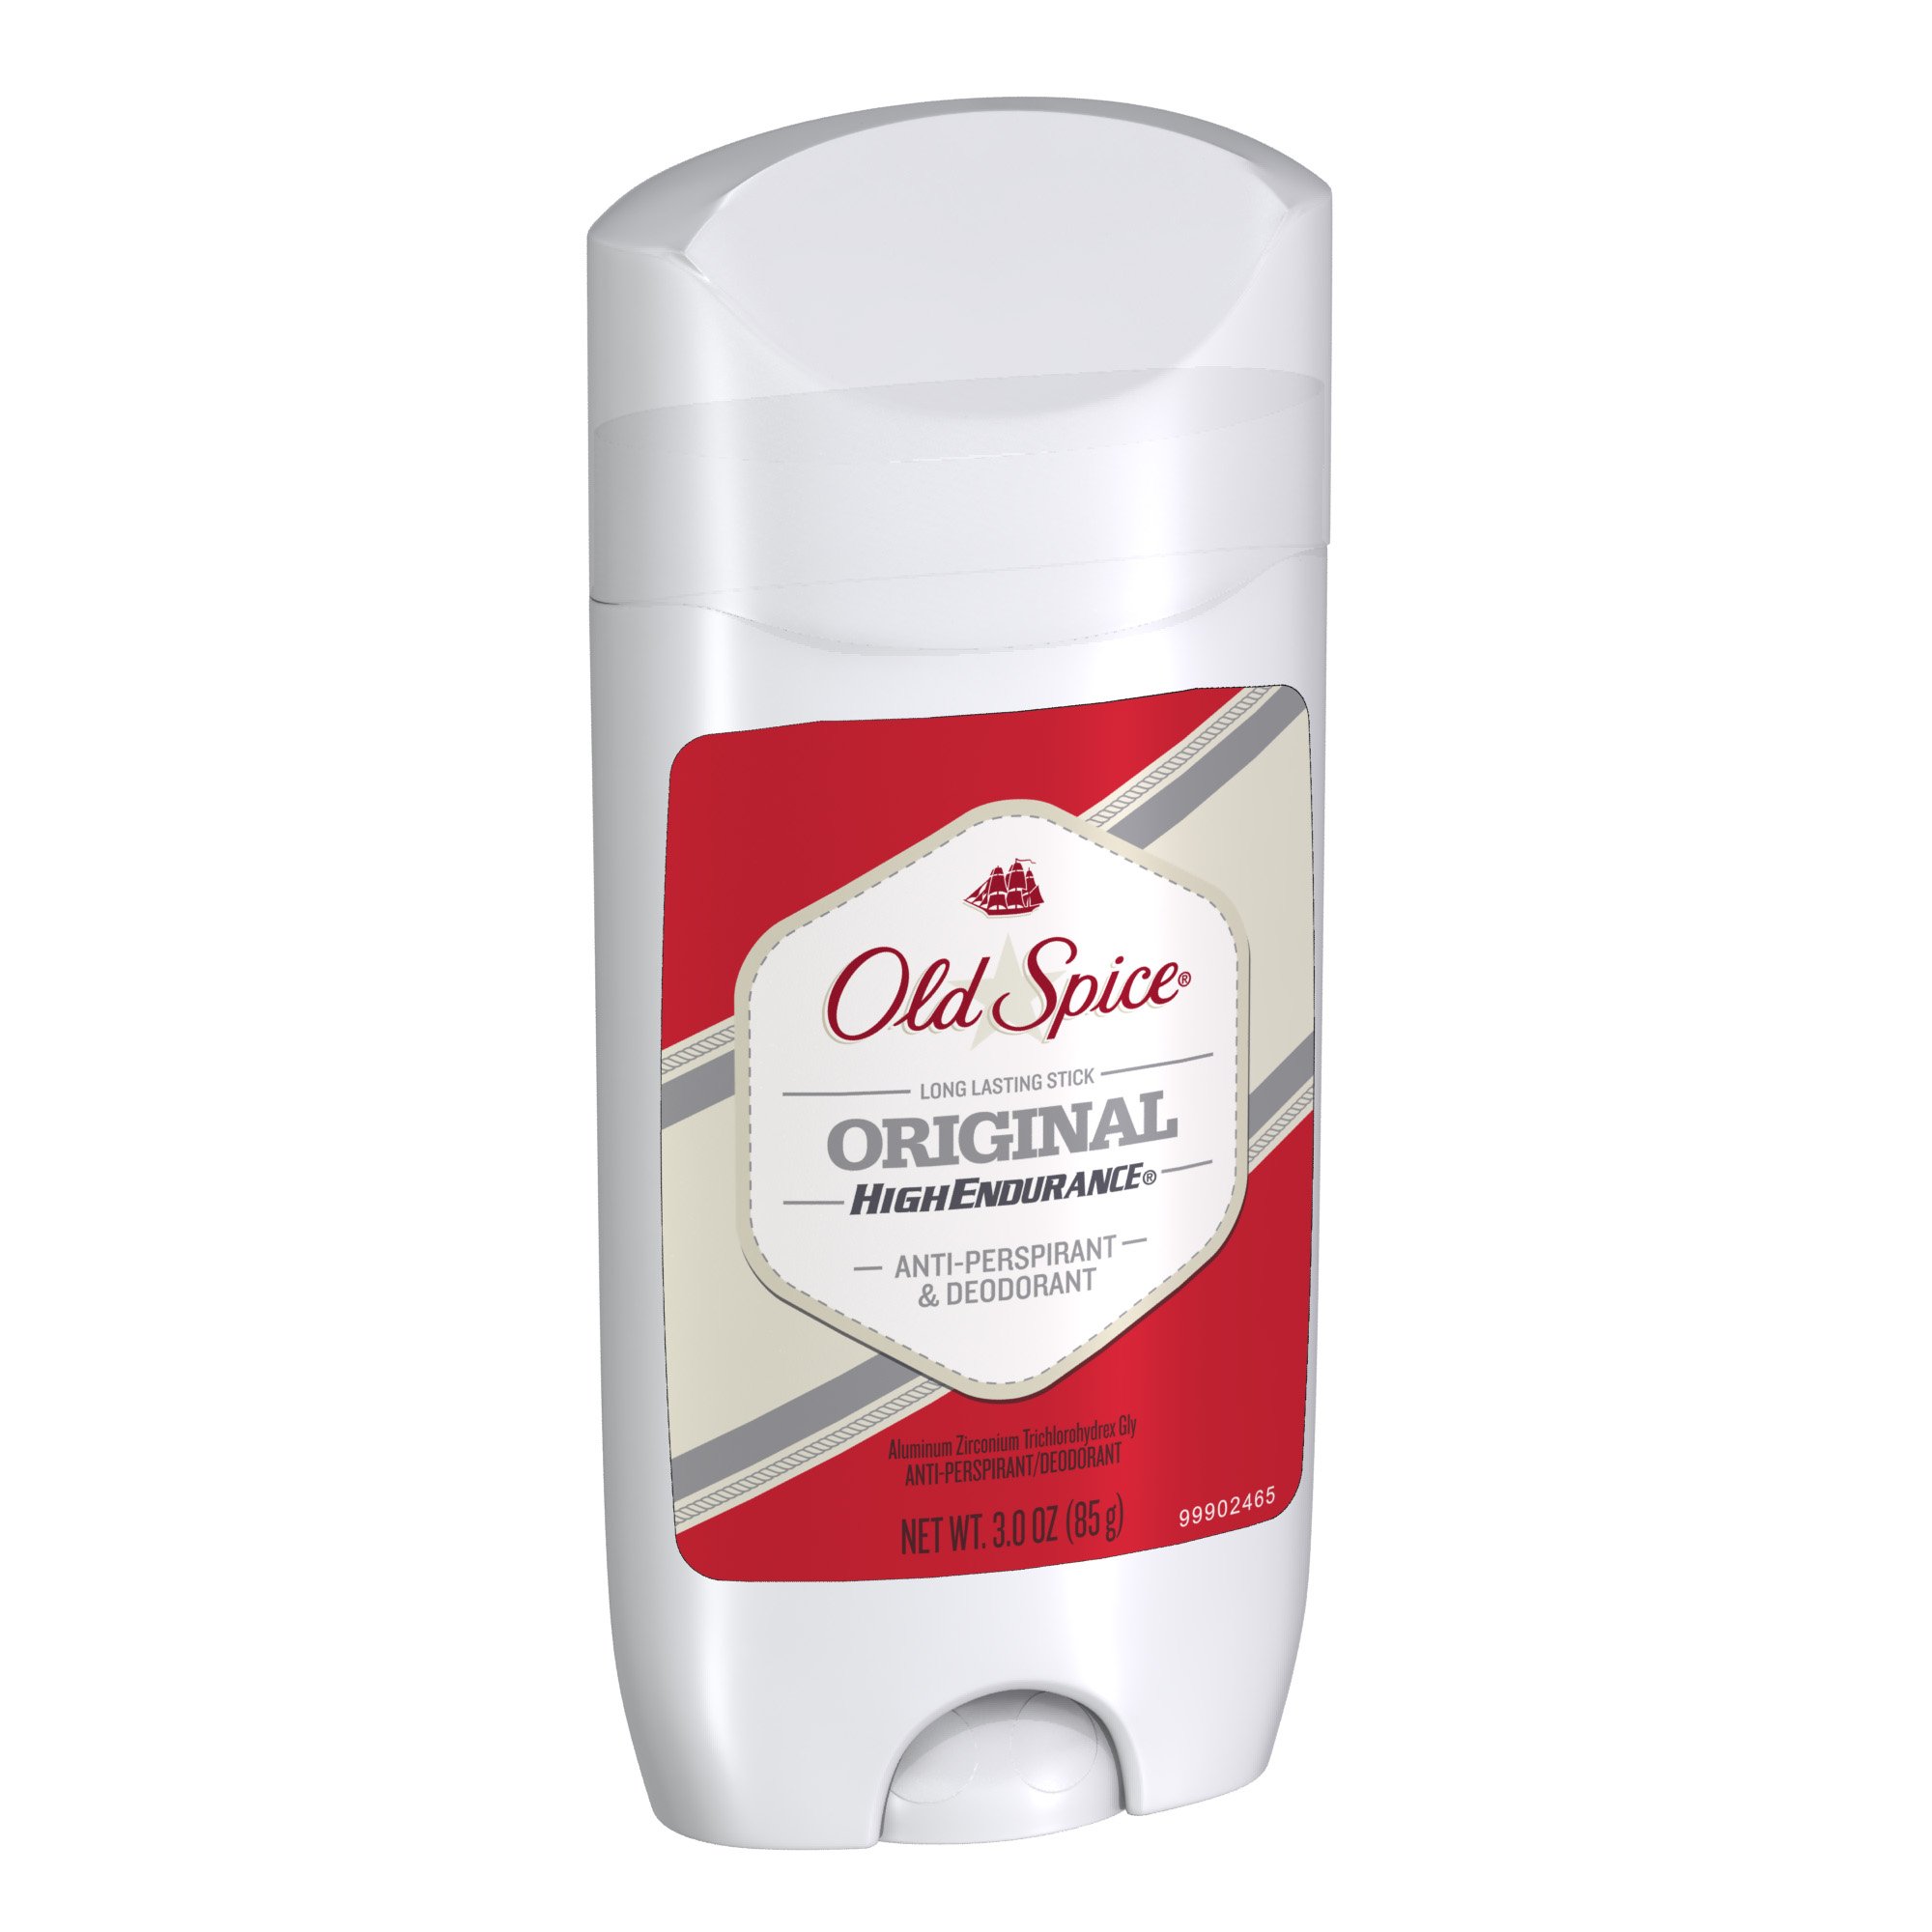 Procter & Gamble Old Spice High Endurance Original Scent Invisible Solid Antiperspirant and Deodorant for Men,3.0 oz